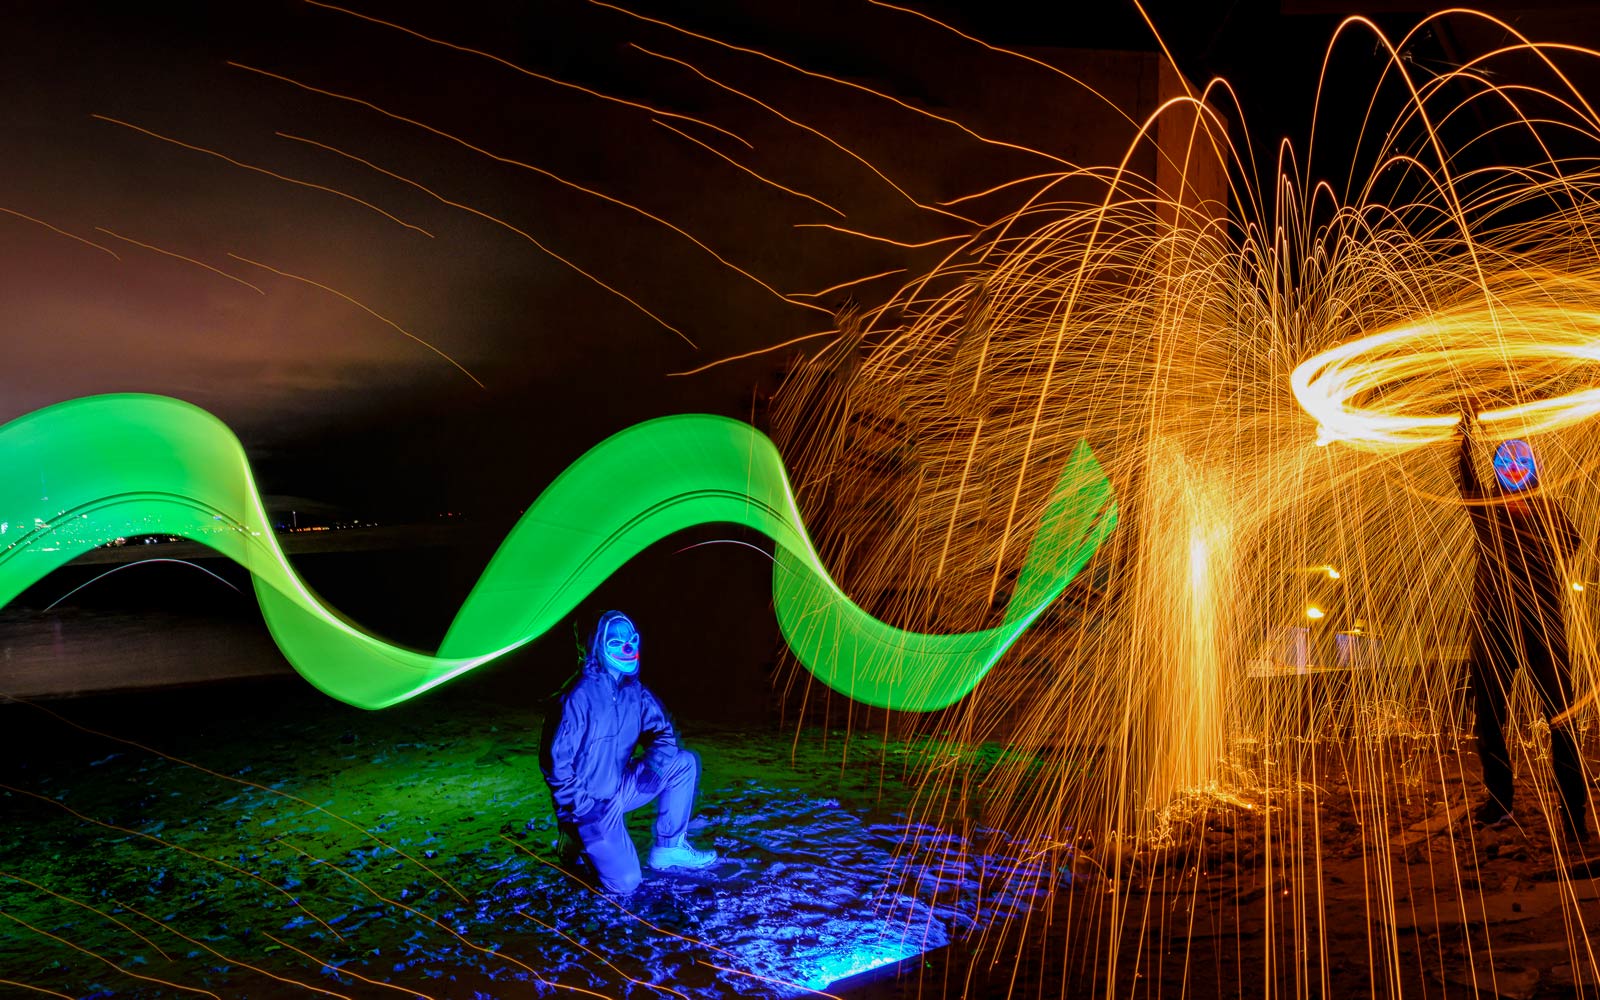 My Experience with Steel Wool and Light Painting at the Tdot Shots Toronto Photography Workshop